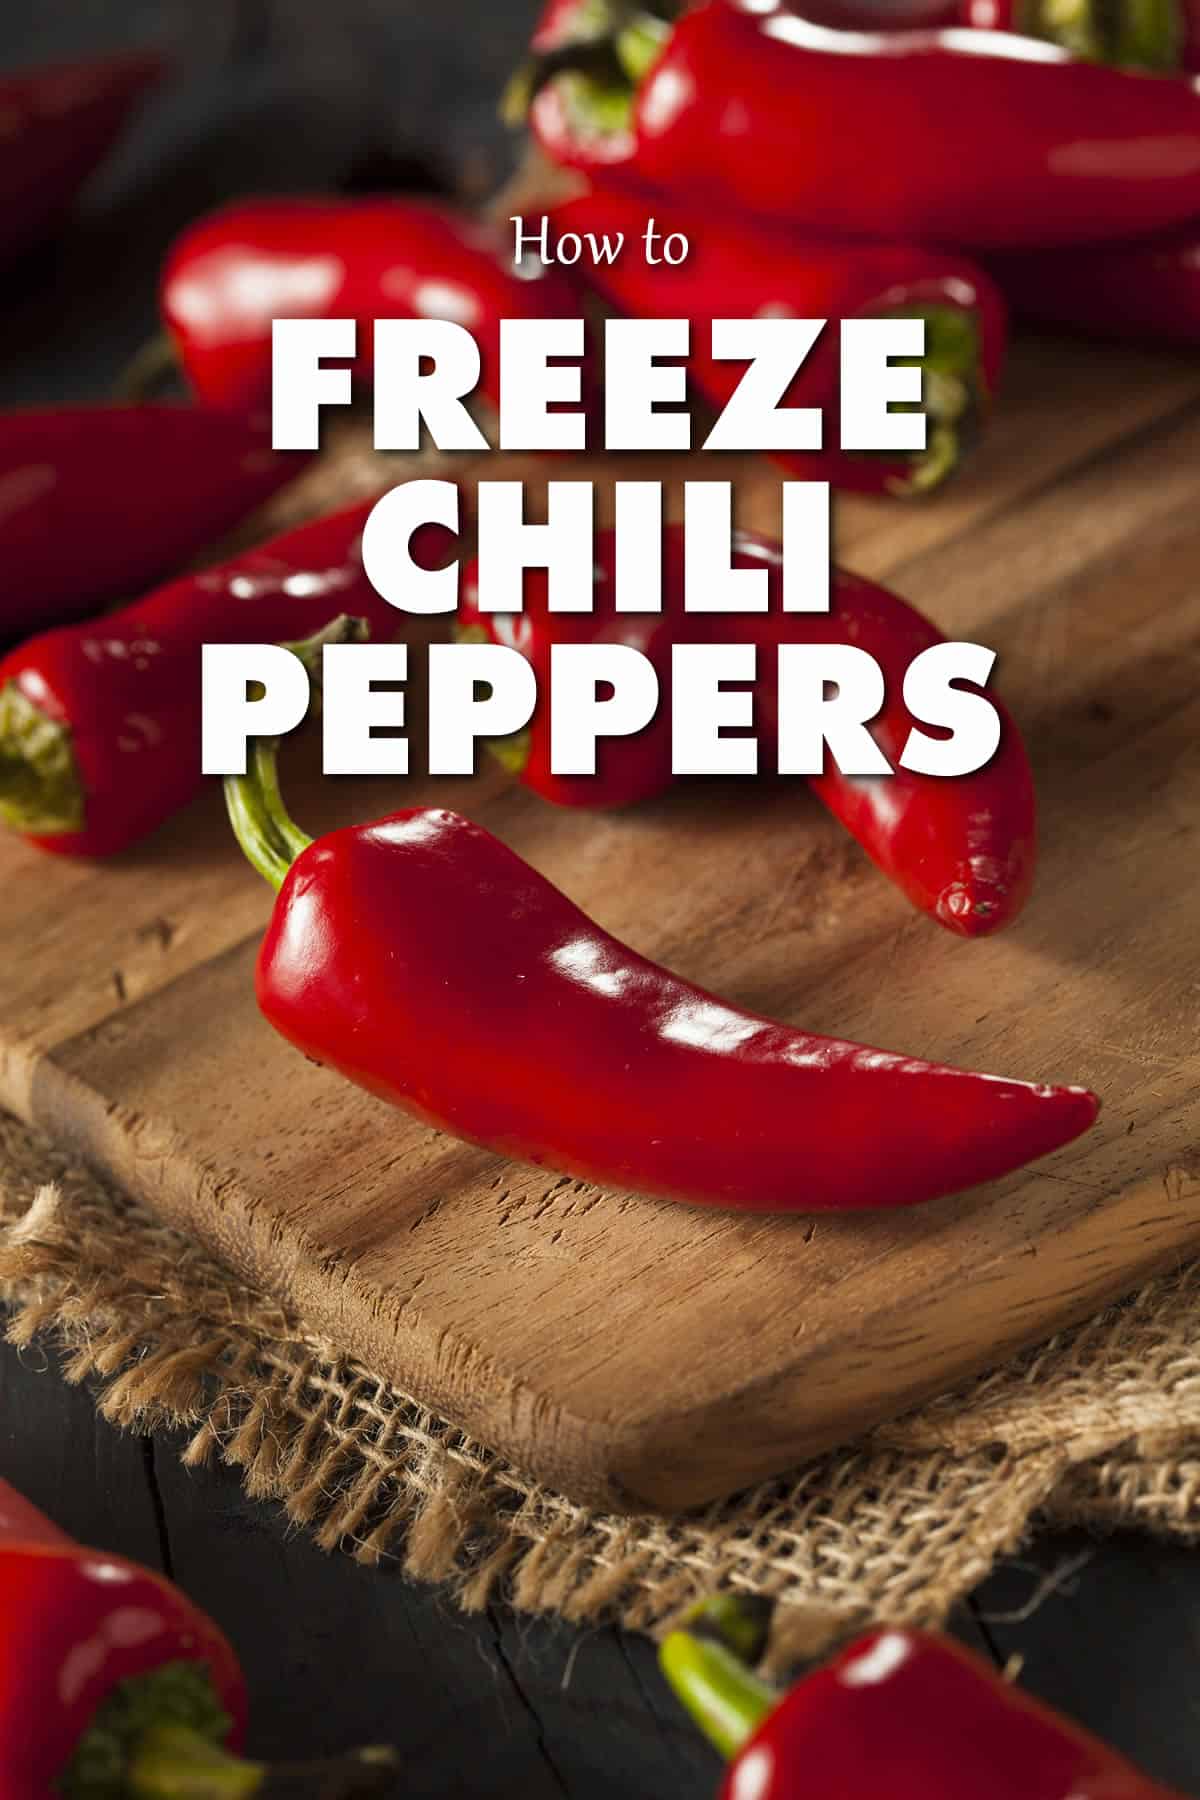 How to Freeze Peppers / Freezing Chili Peppers